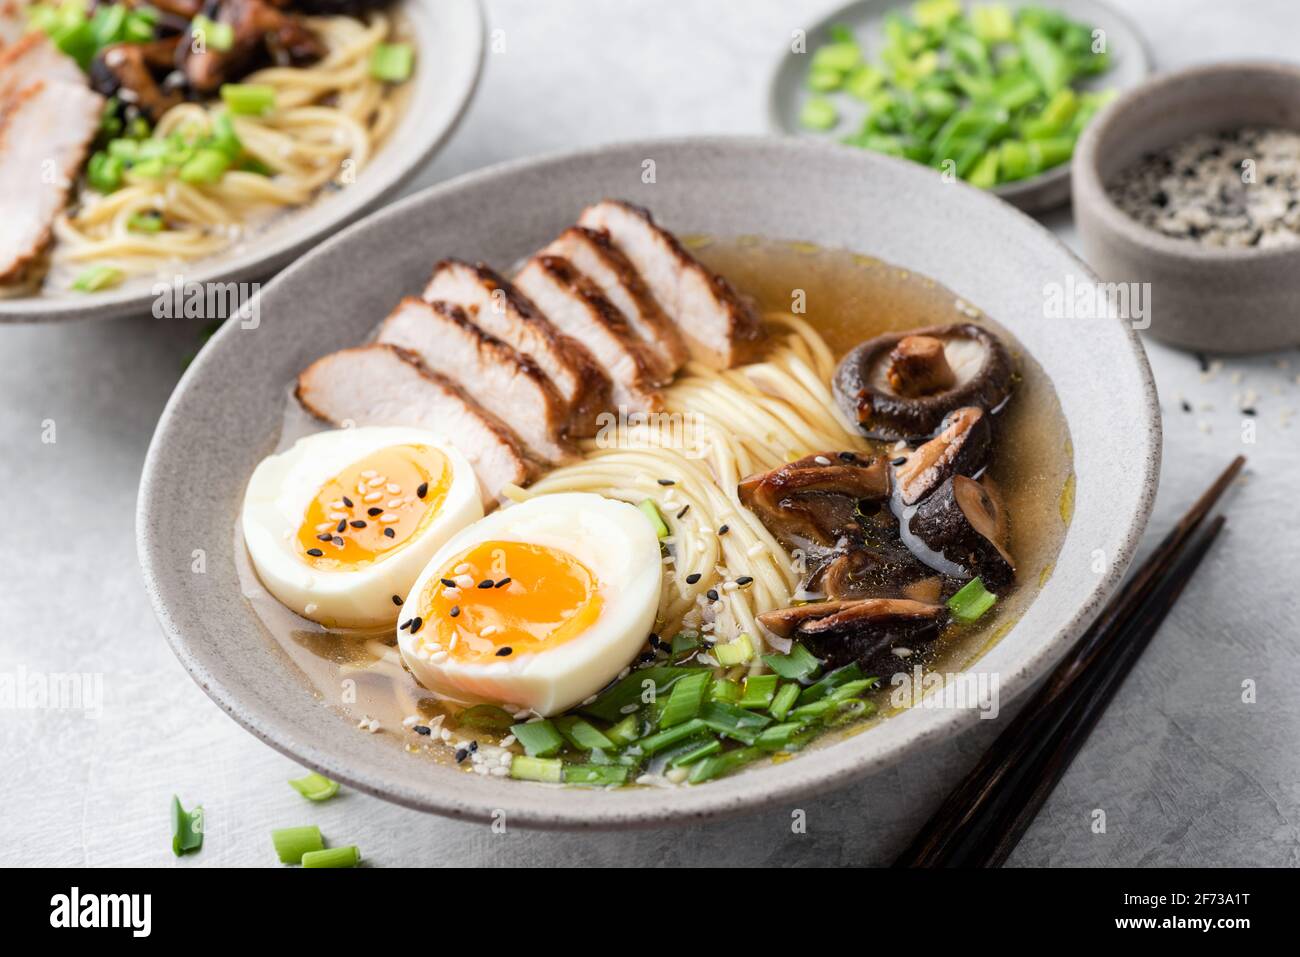 Ramen noodles with chicken, shiitake and egg in a bowl, closeup view. Asian cuisine food Stock Photo